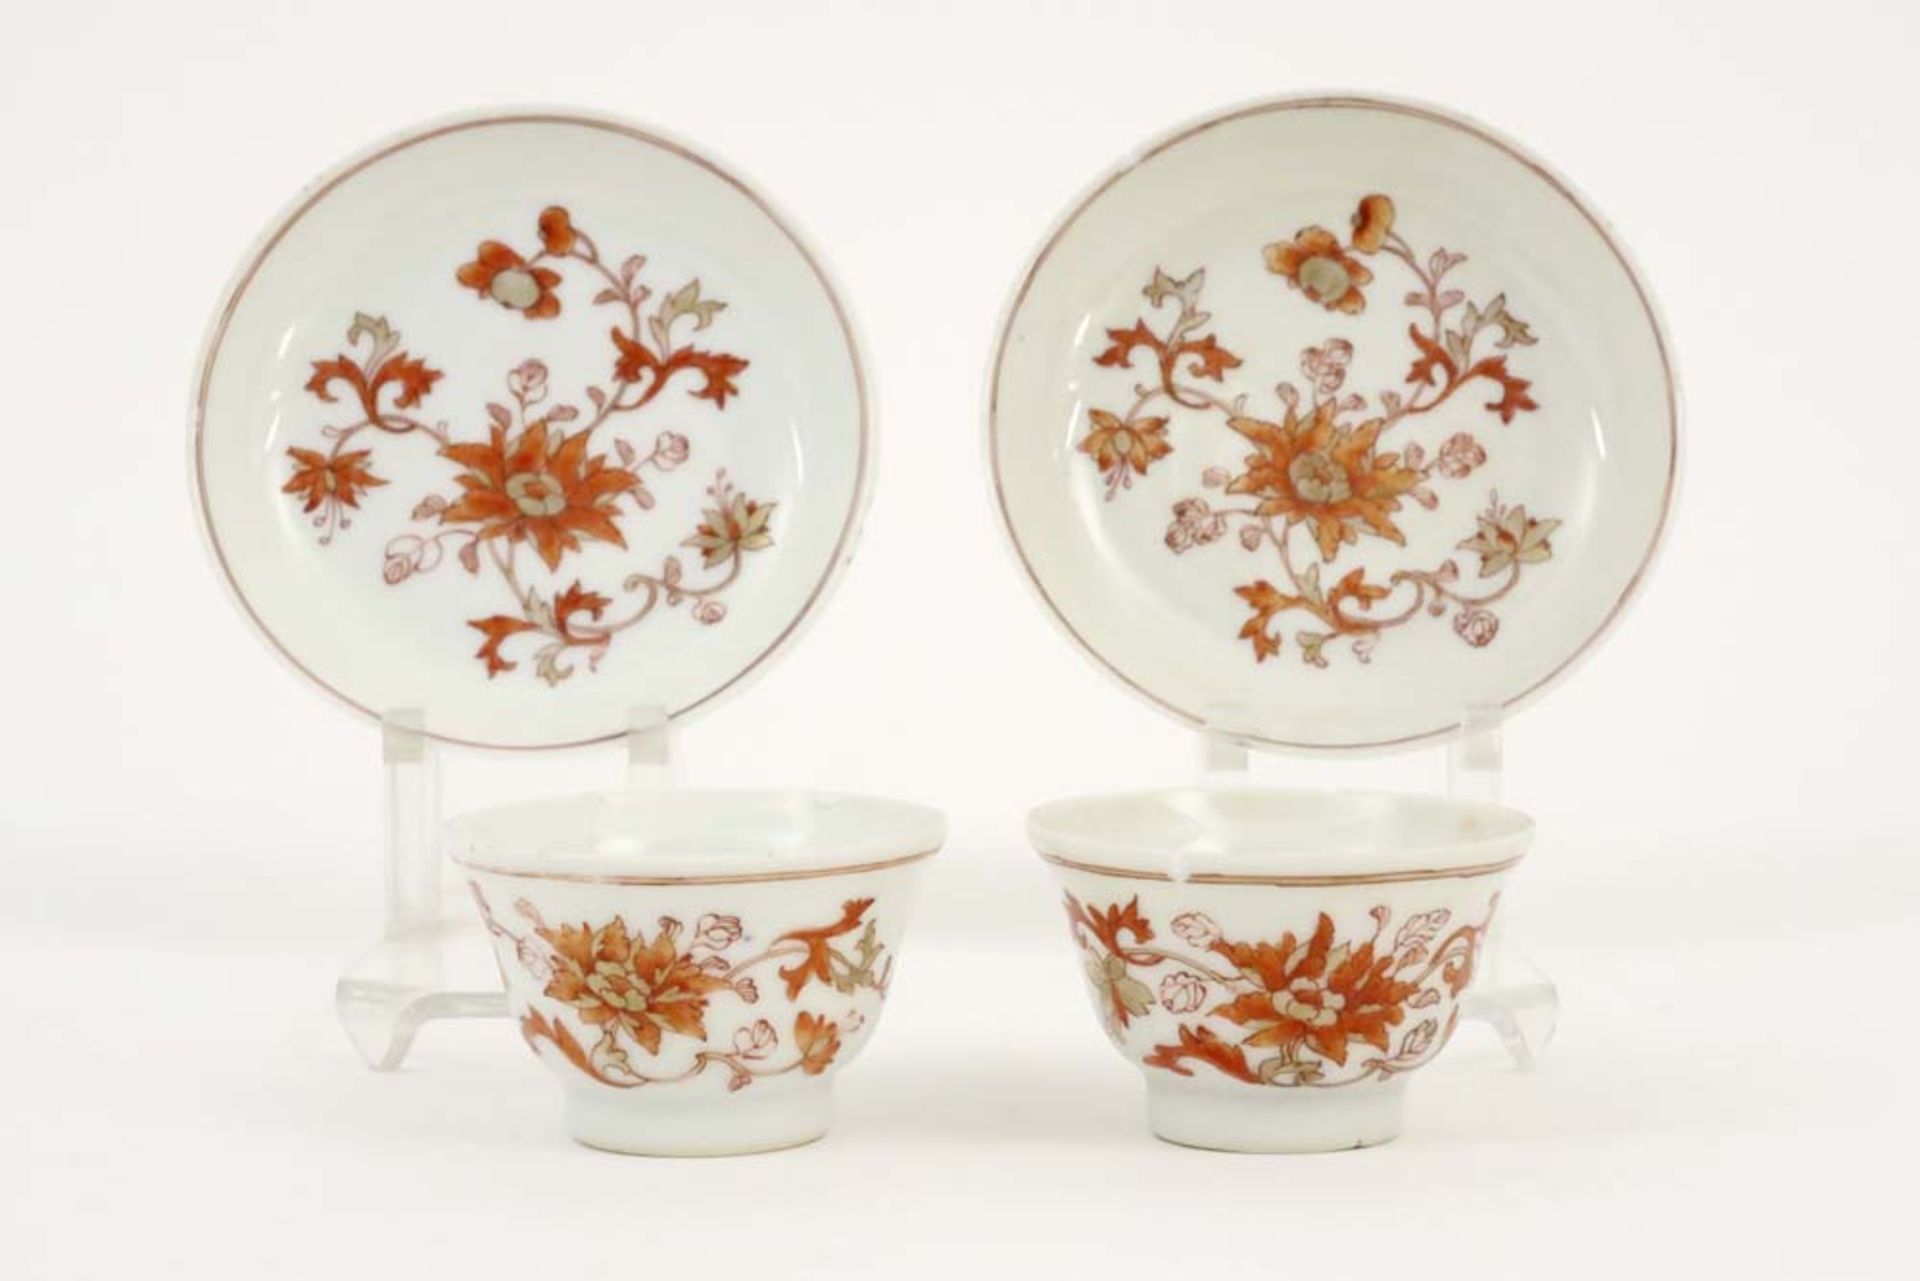 two 18th Cent. Chinese sets of cup and saucer in porcelain with a flower decor in sanguine colors